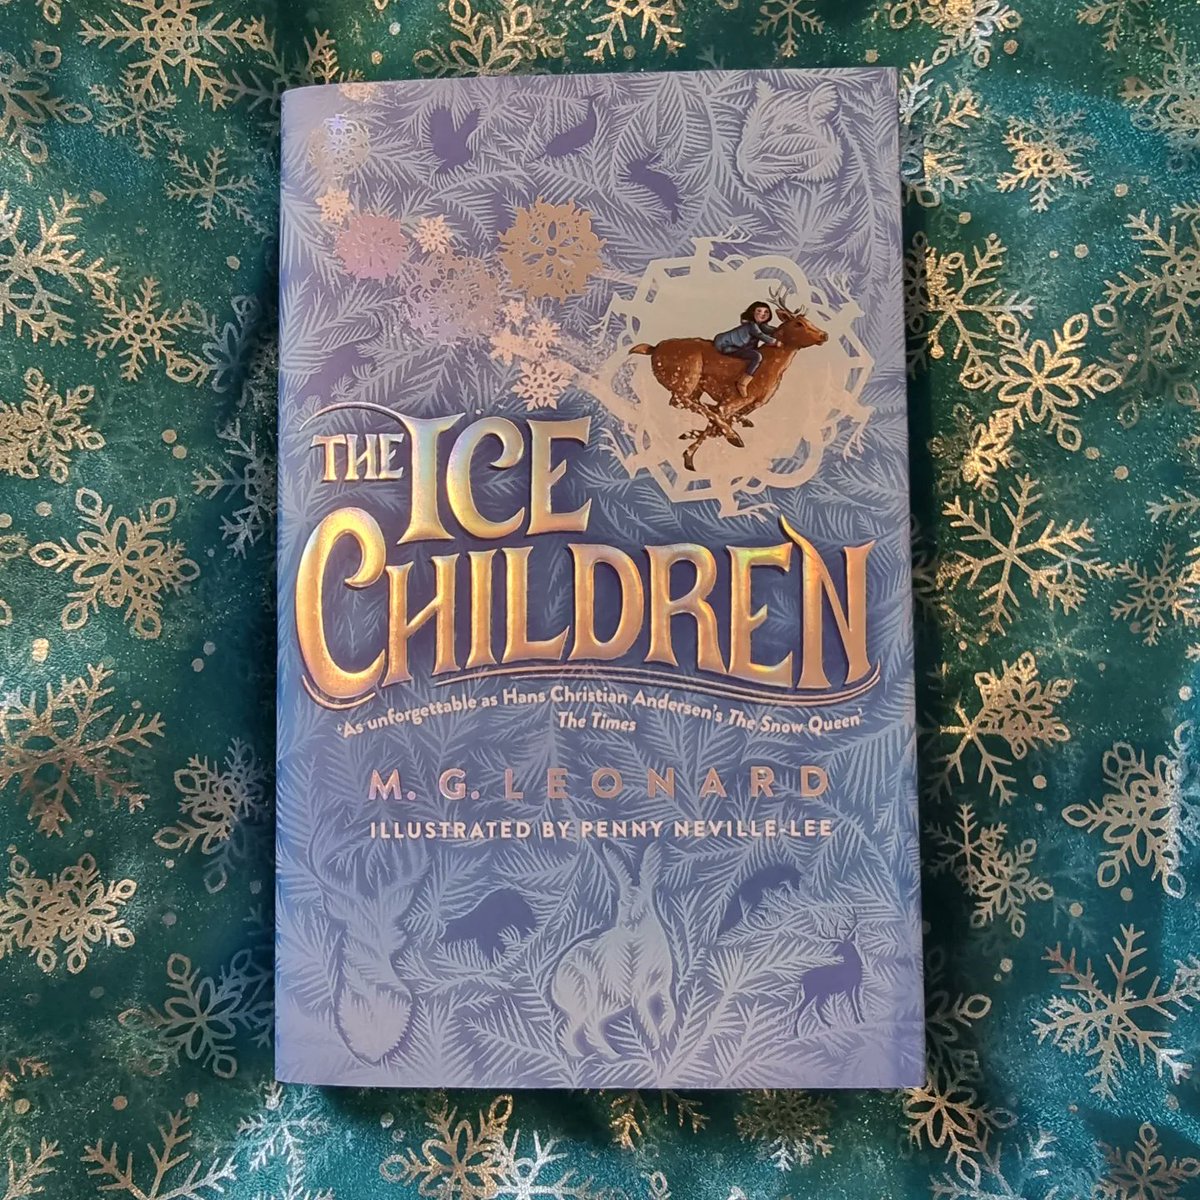 #TheIceChildren by M.G.Leonard is out today! I absolutely loved this wintry and magical Middle-Grade adventure. Read my review here:
instagram.com/p/CzI0mKJrPuz/…
@MacmillanKidsUK 
#childrensbooks #kidslit #middlegrade #books